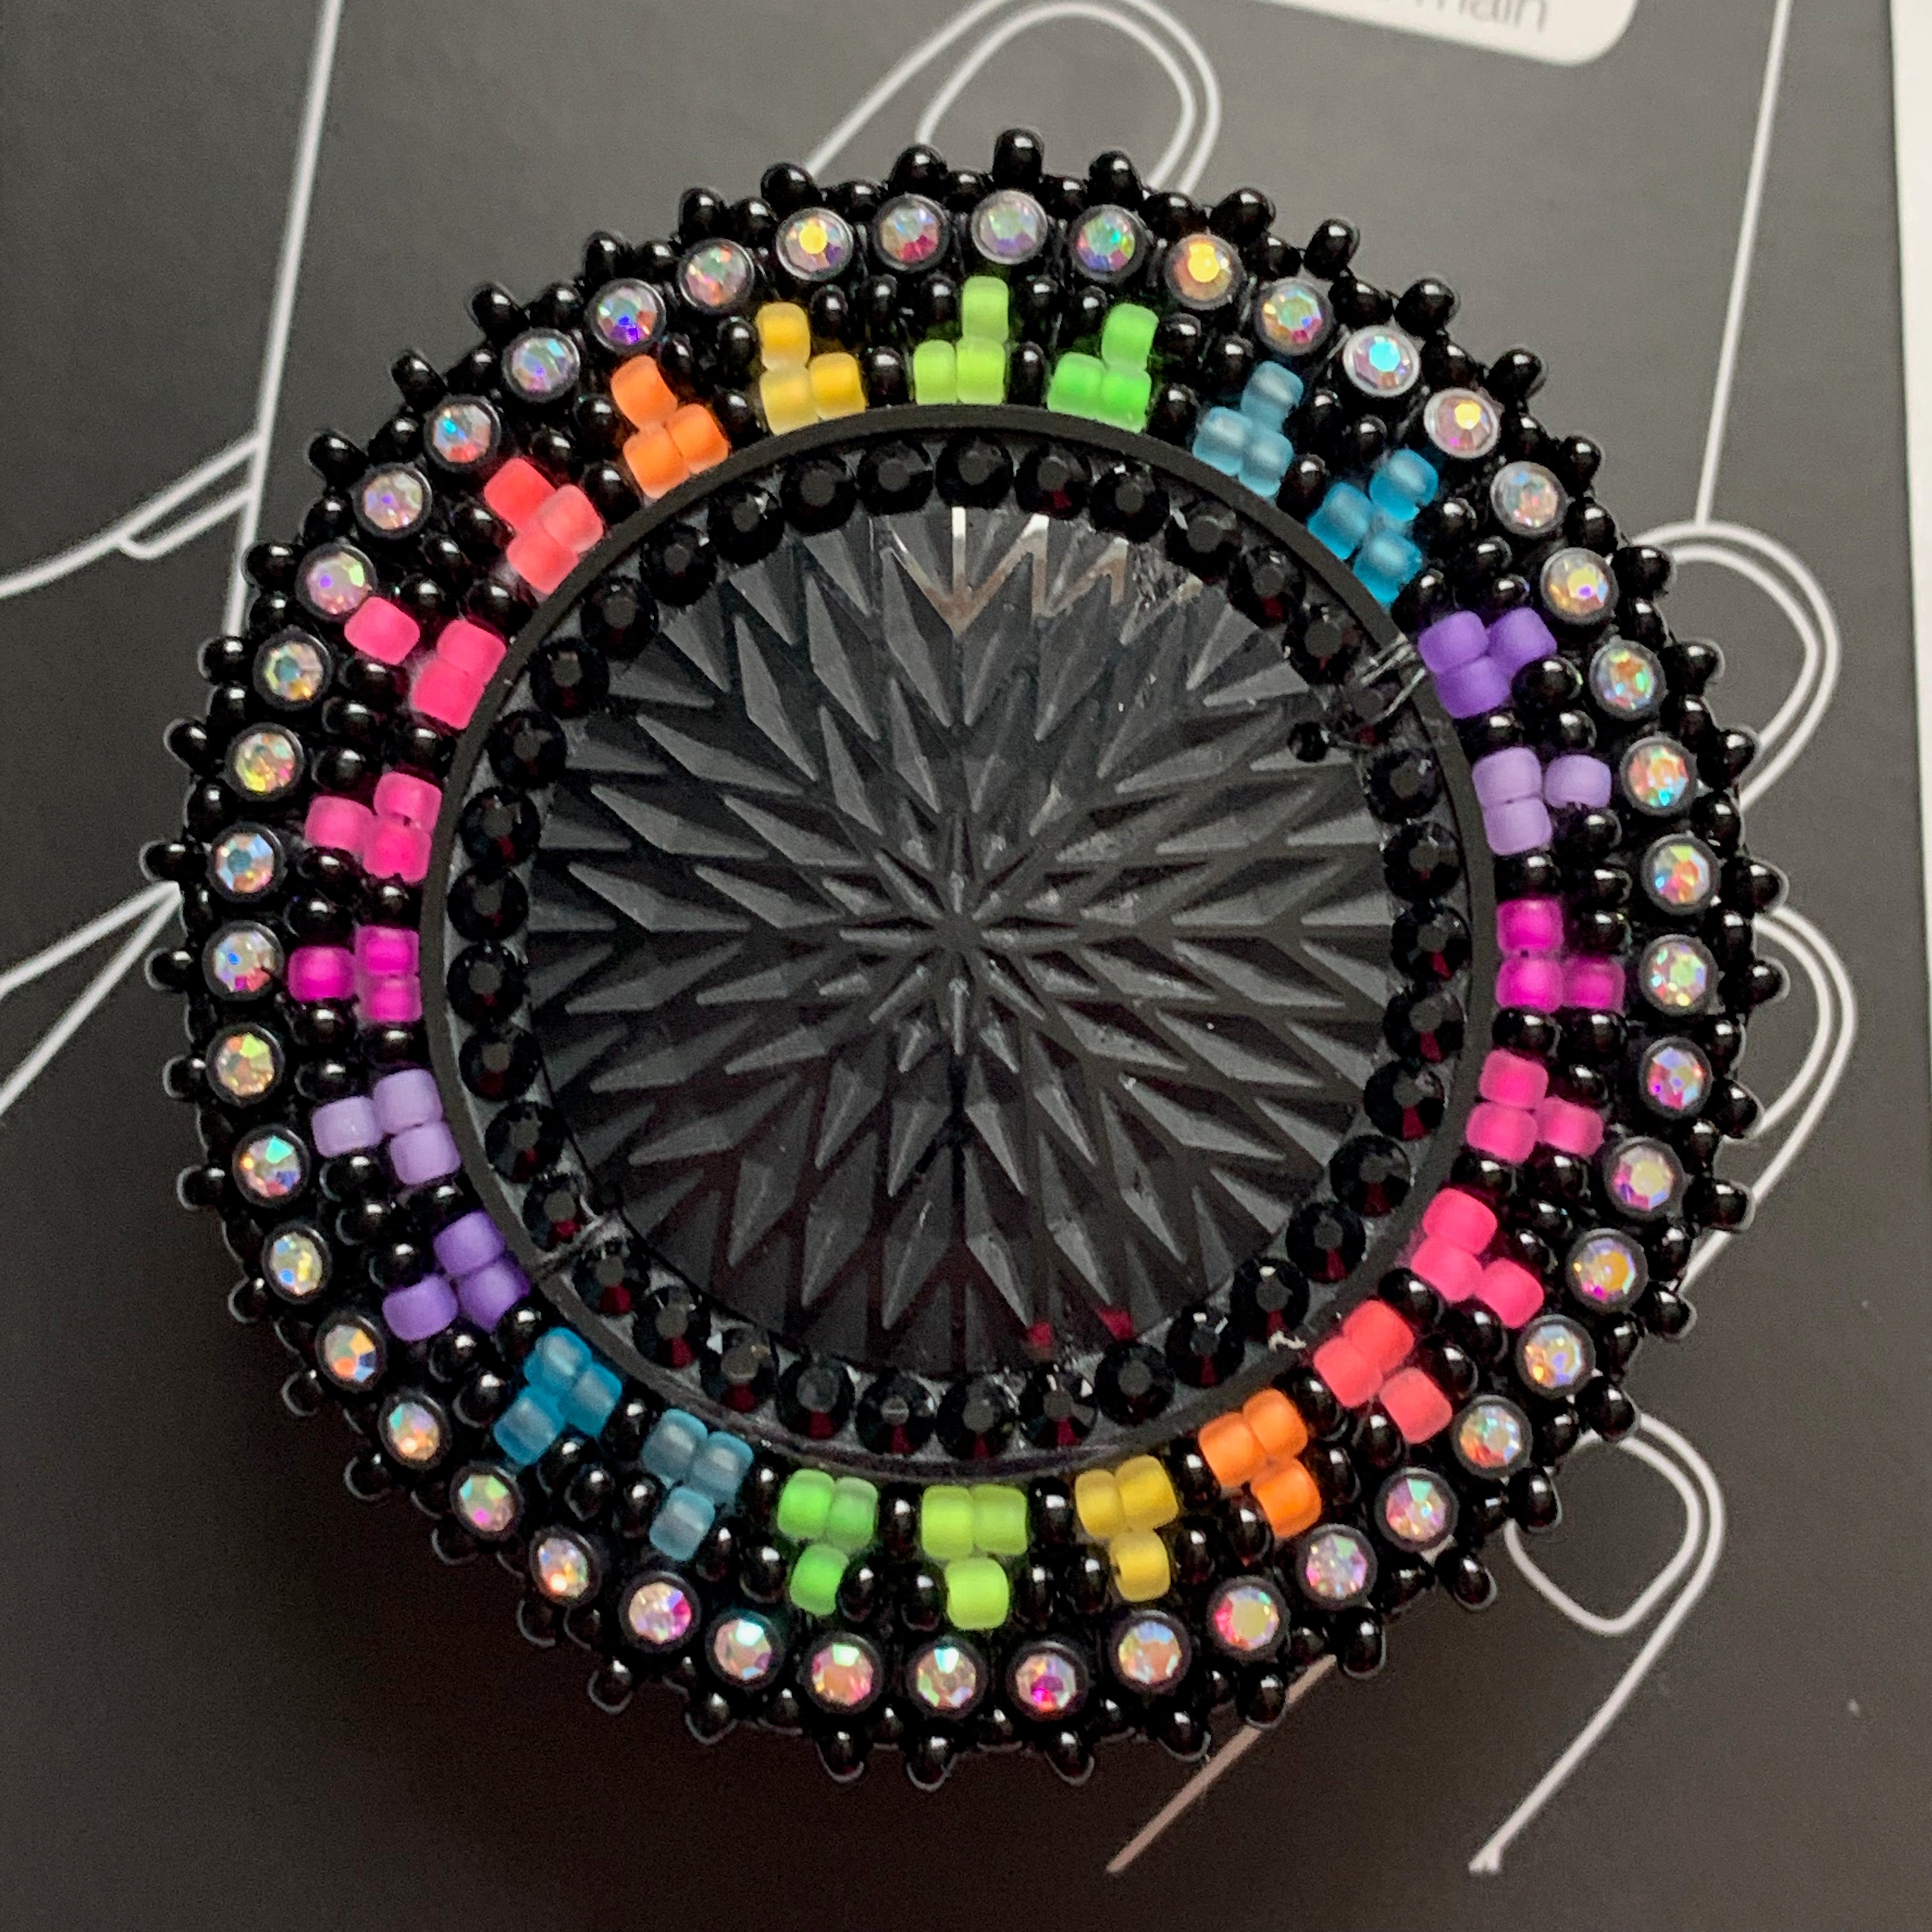 10 Easy Pony Bead Projects - the neon tea party